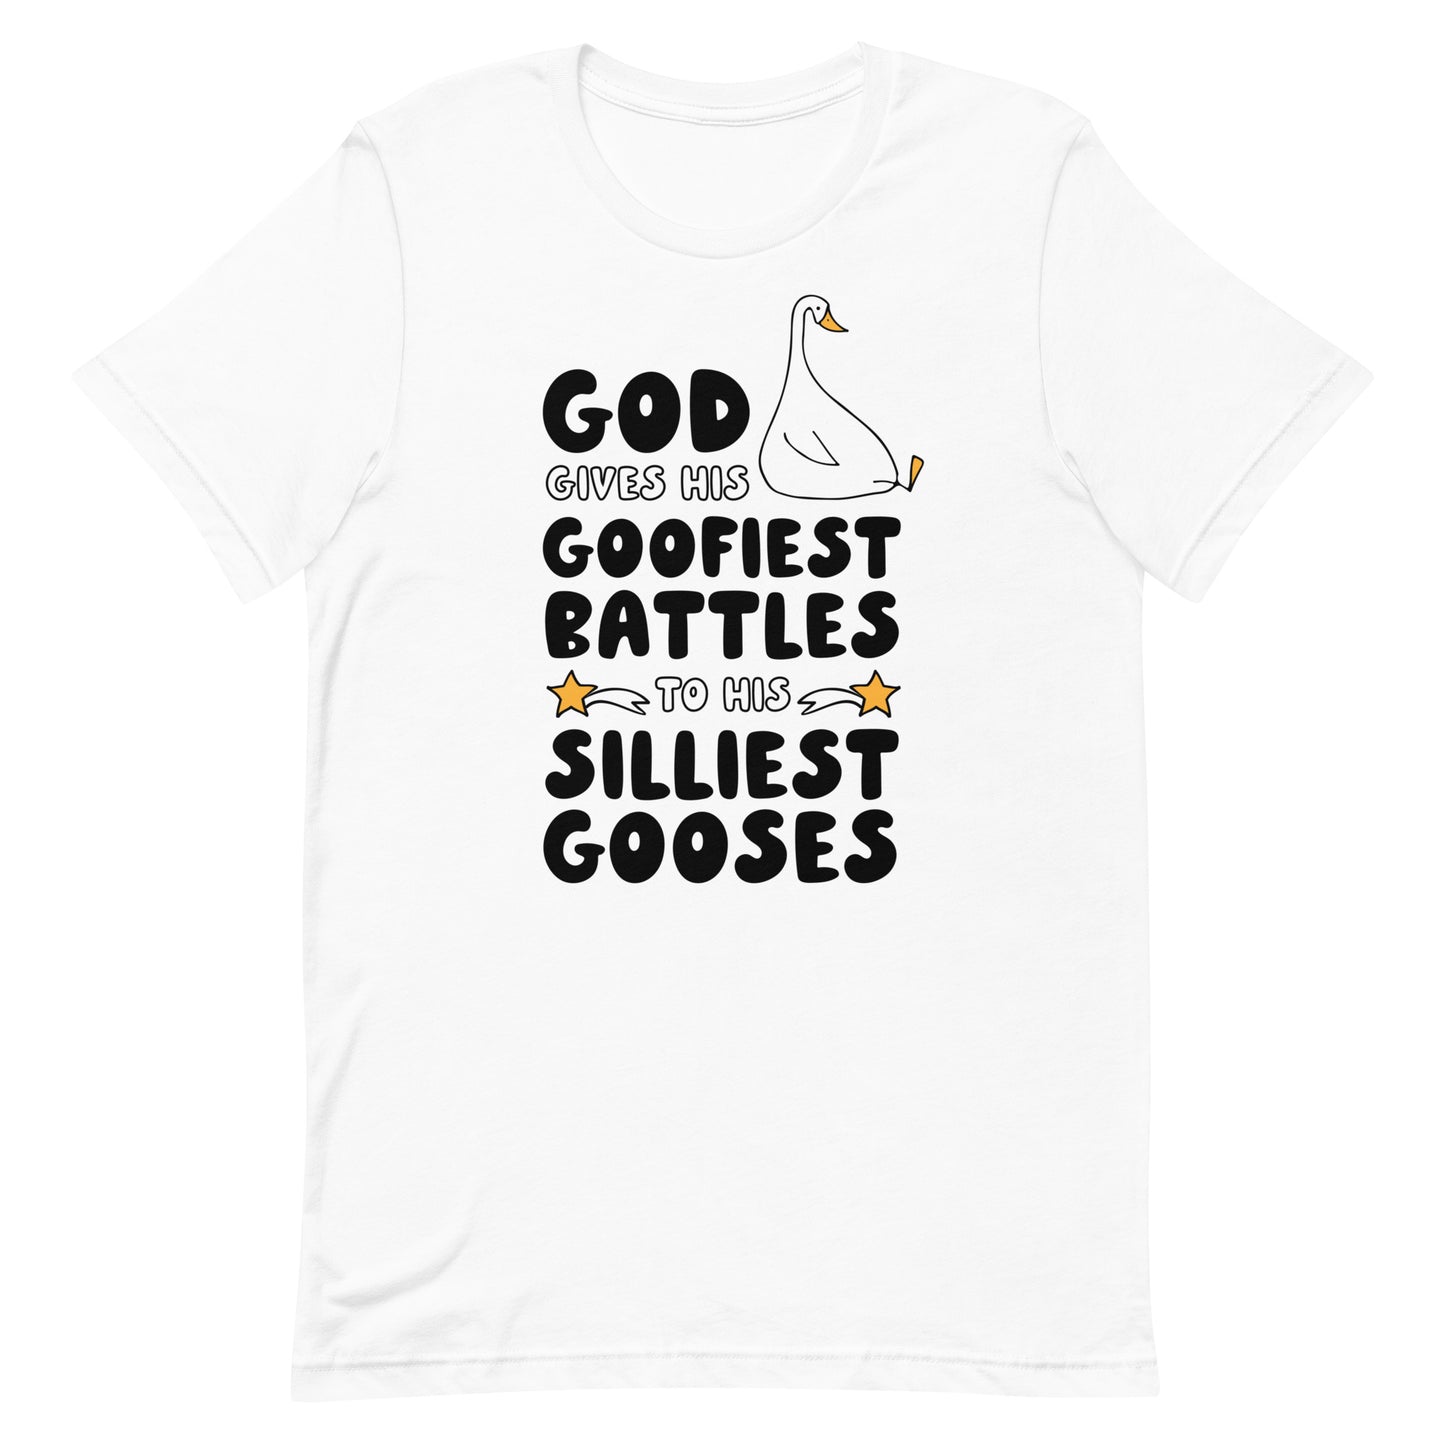 God Gives His Goofiest Battles to His Silliest Gooses Unisex t-shirt